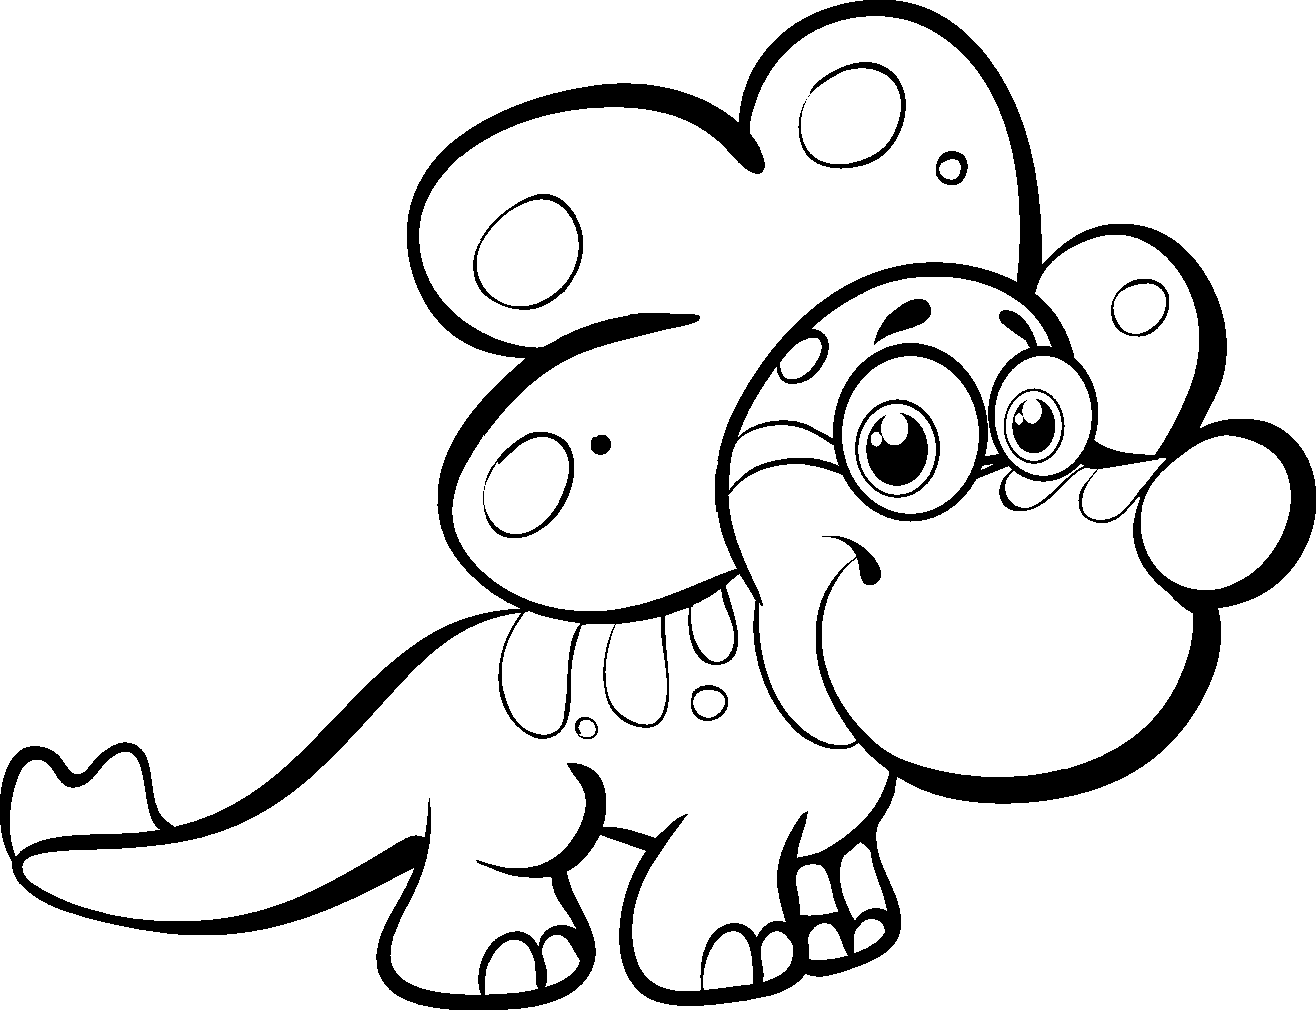 Cartoon Dinosaur Coloring Pages